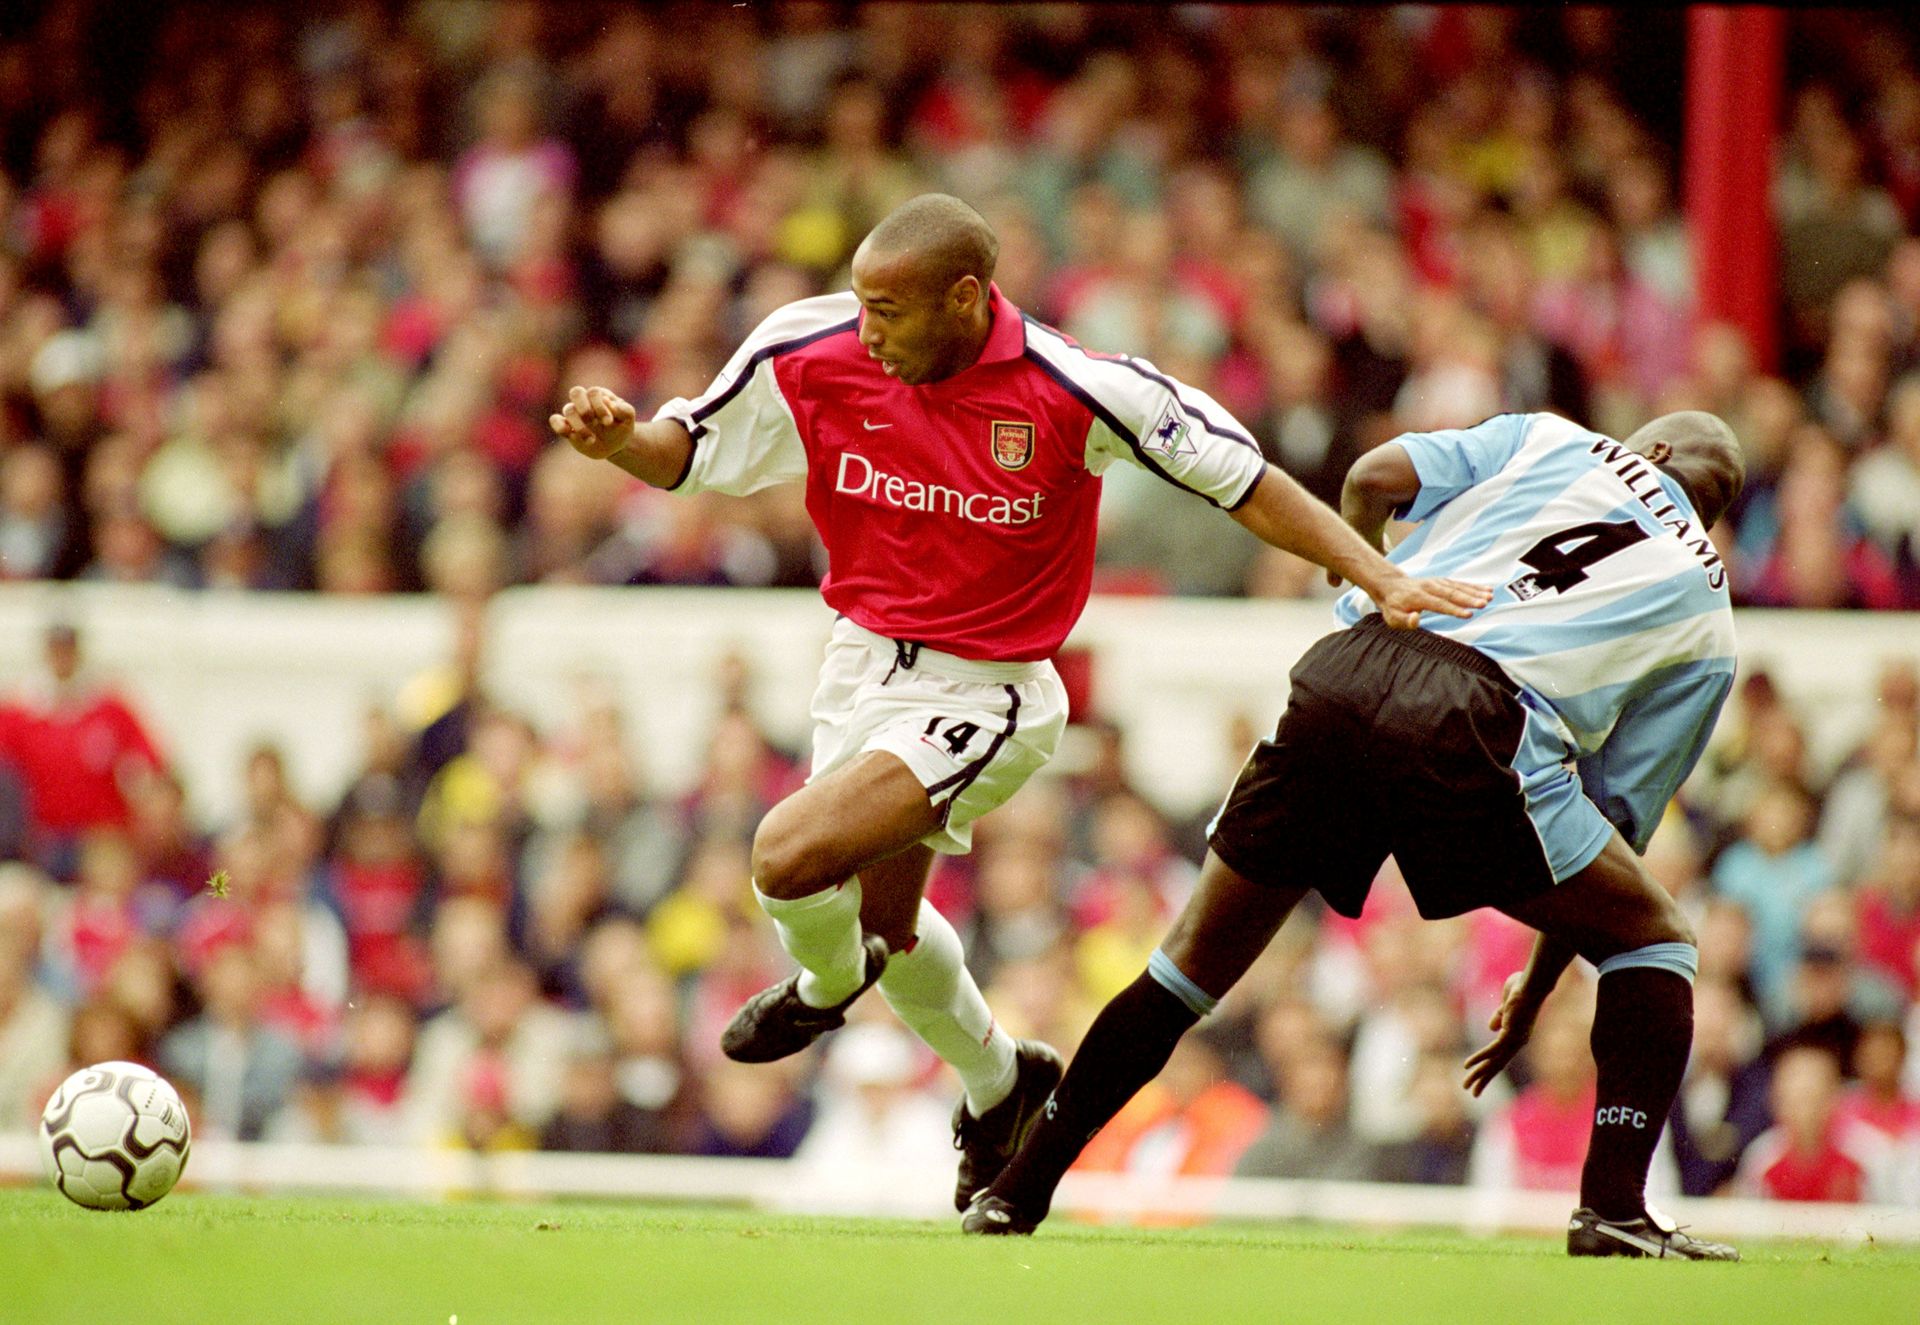 <p>                     After a difficult spell at Juventus, Thierry Henry moved to Arsenal in August 1999 for £11 million (around €16.1m) and went on to become a Gunners legend.                   </p>                                      <p>                     Linking up with his former Monaco coach Arsene Wenger, Henry was used as a striker at Arsenal and hit 226 goals in 370 games in an impressive eight-year stint before joining Barcelona. The French forward added two more goals in a short spell on loan from New York Red Bulls in 2012.                   </p>